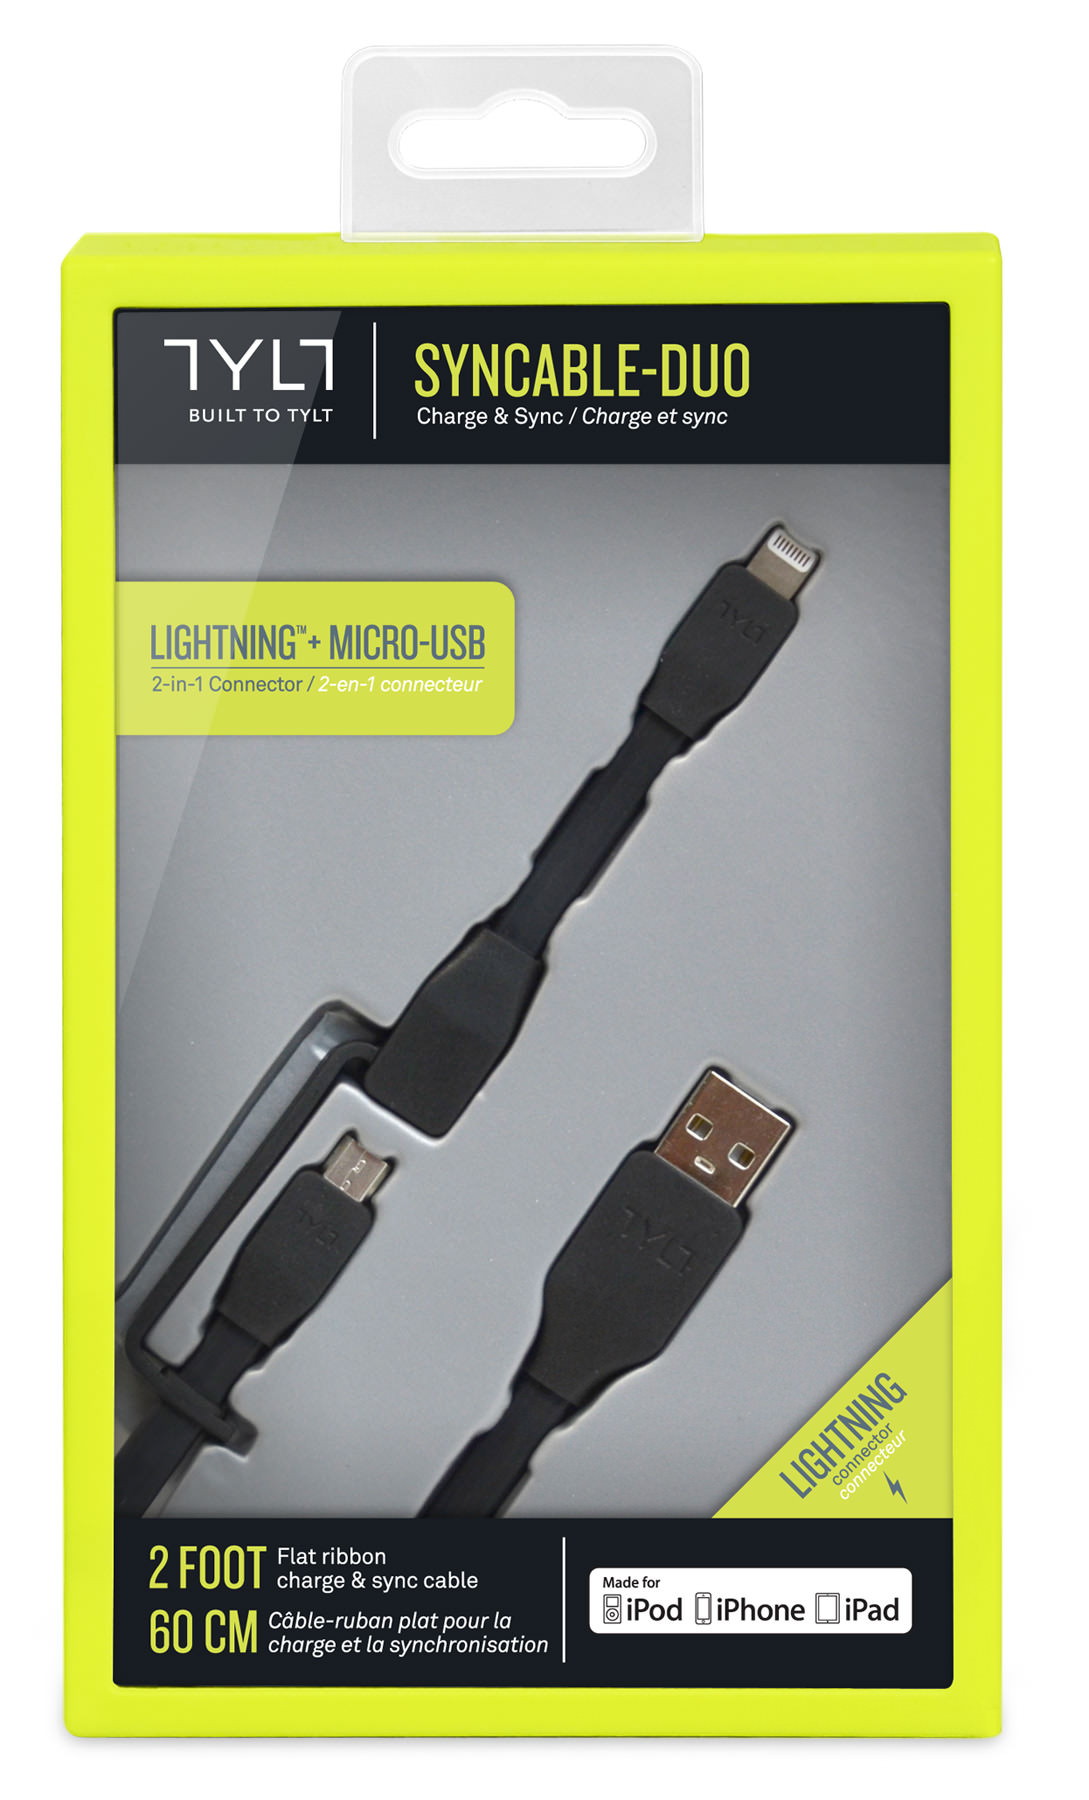 TYLT SYNCABLE DUO 03